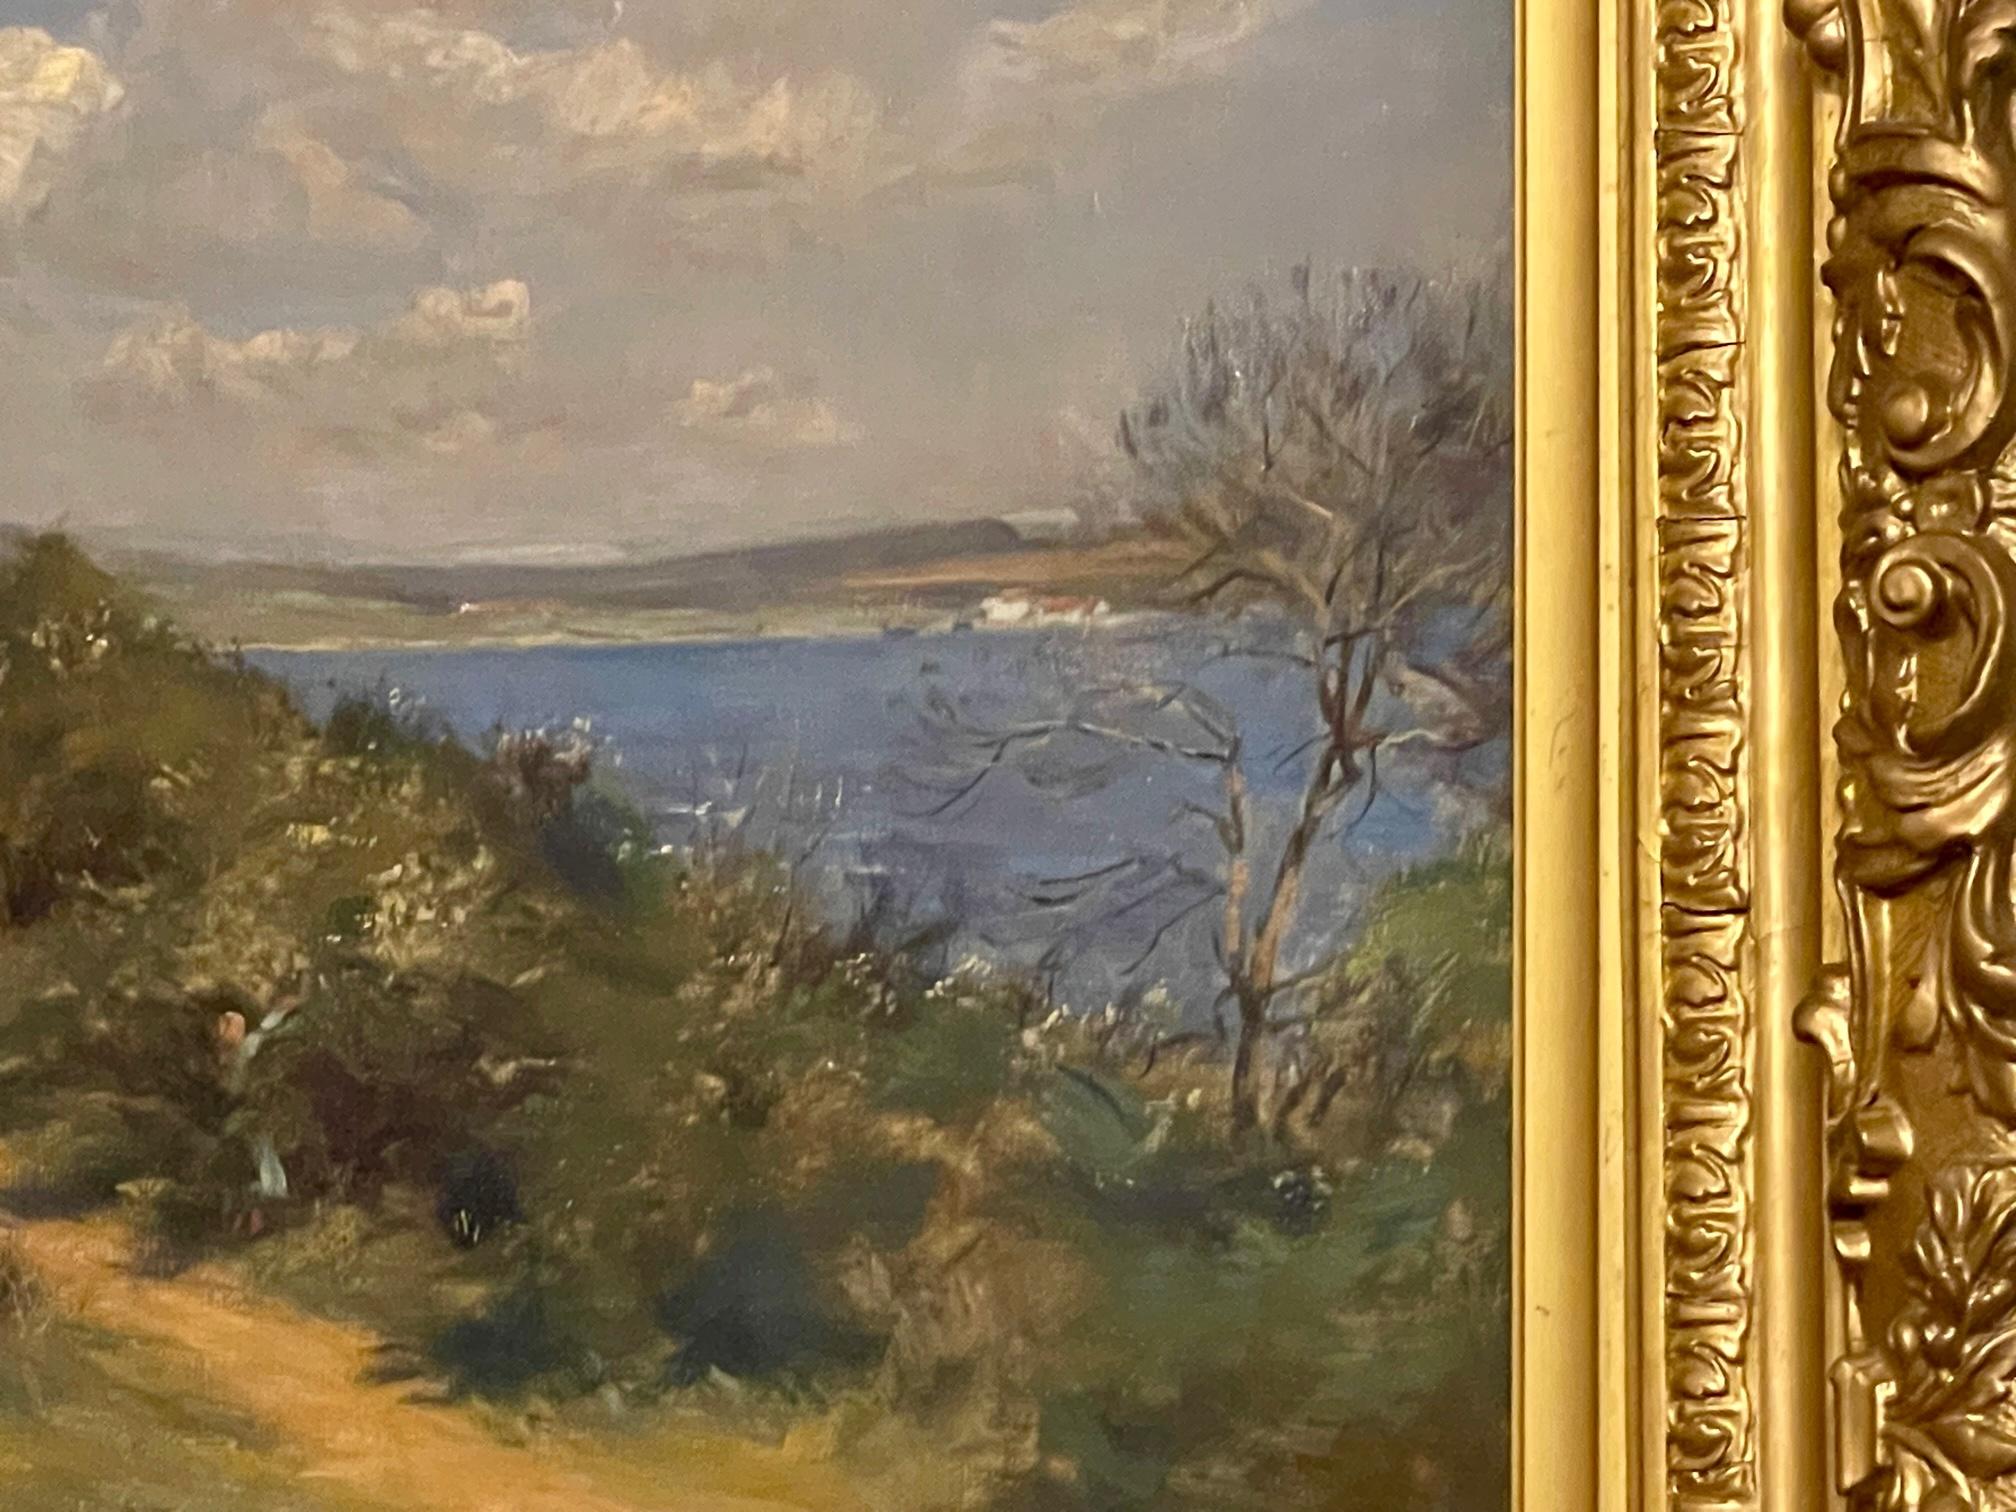 'Picking Blackberries' is a 19th/early 20th century oil on canvas painting of a Scottish coastal path view with yellow gorse and berry bushes. Children are picking berries or sitting enjoying the view overlooking the sea, depicting halcyon days of